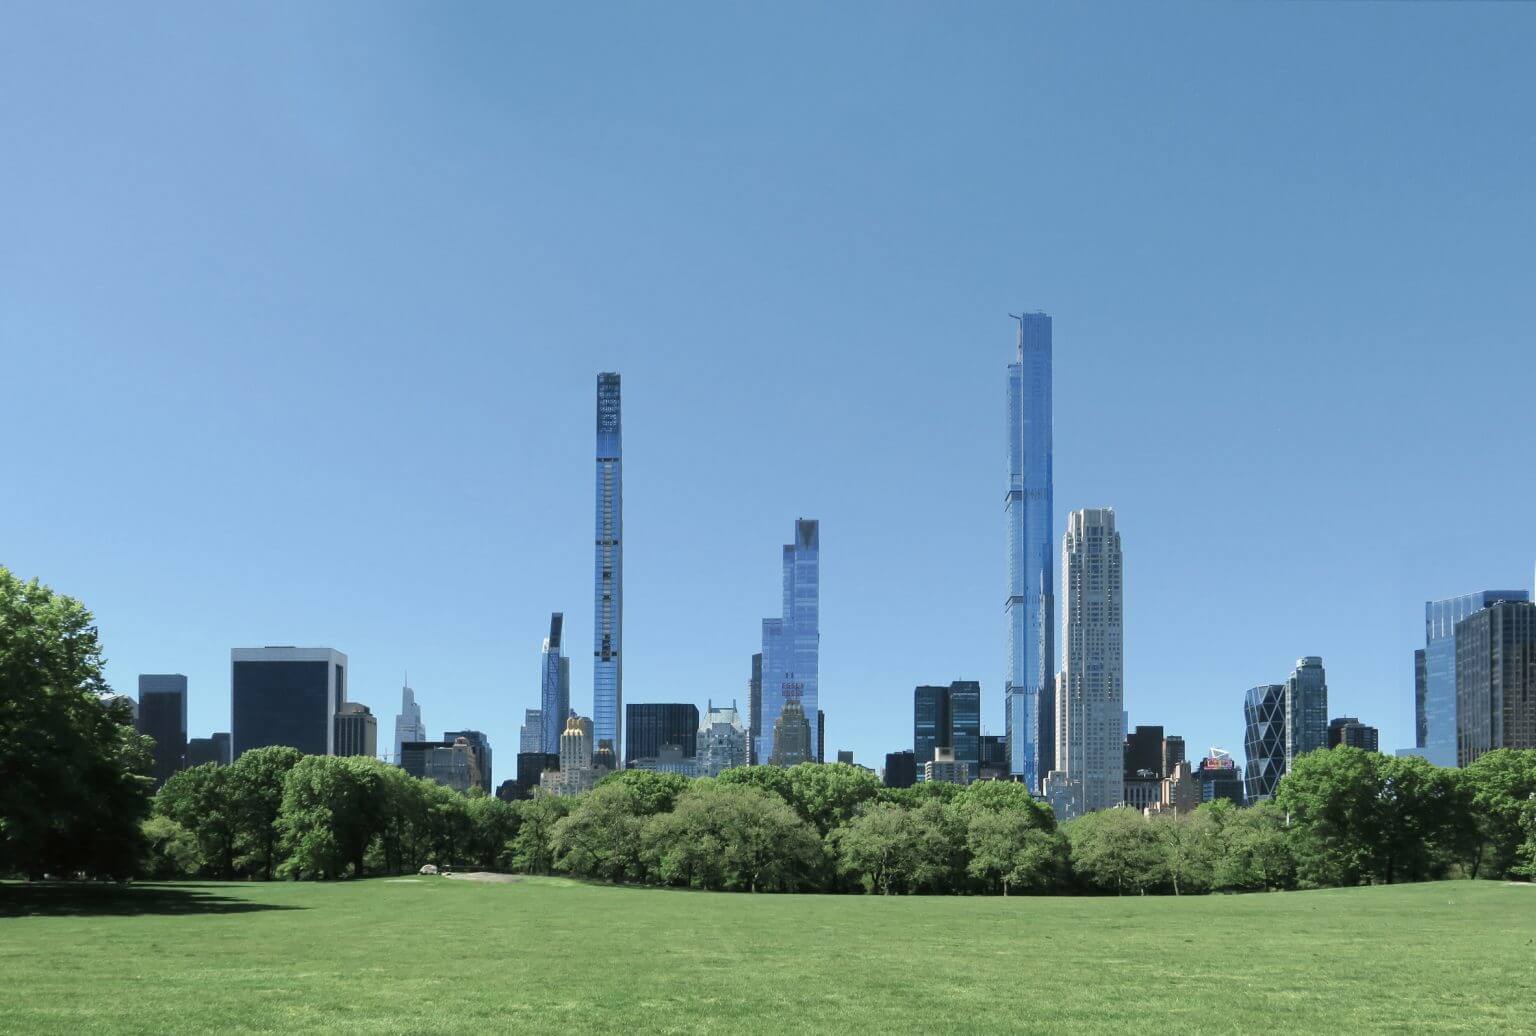 A grassy field in front of a city skyline
